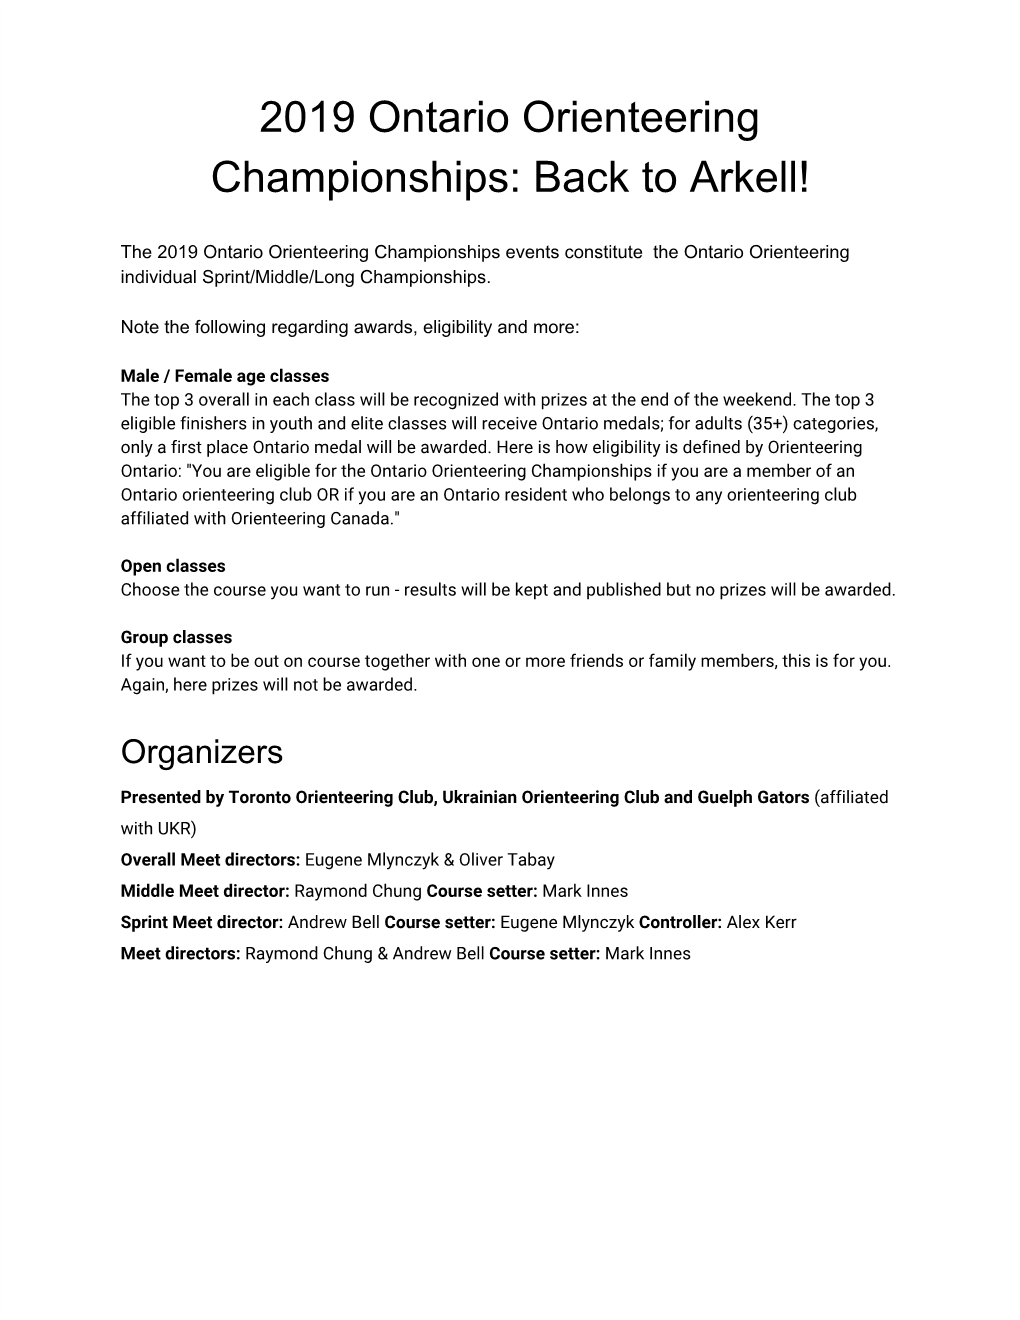 2019 Ontario Orienteering Championships: Back to Arkell!